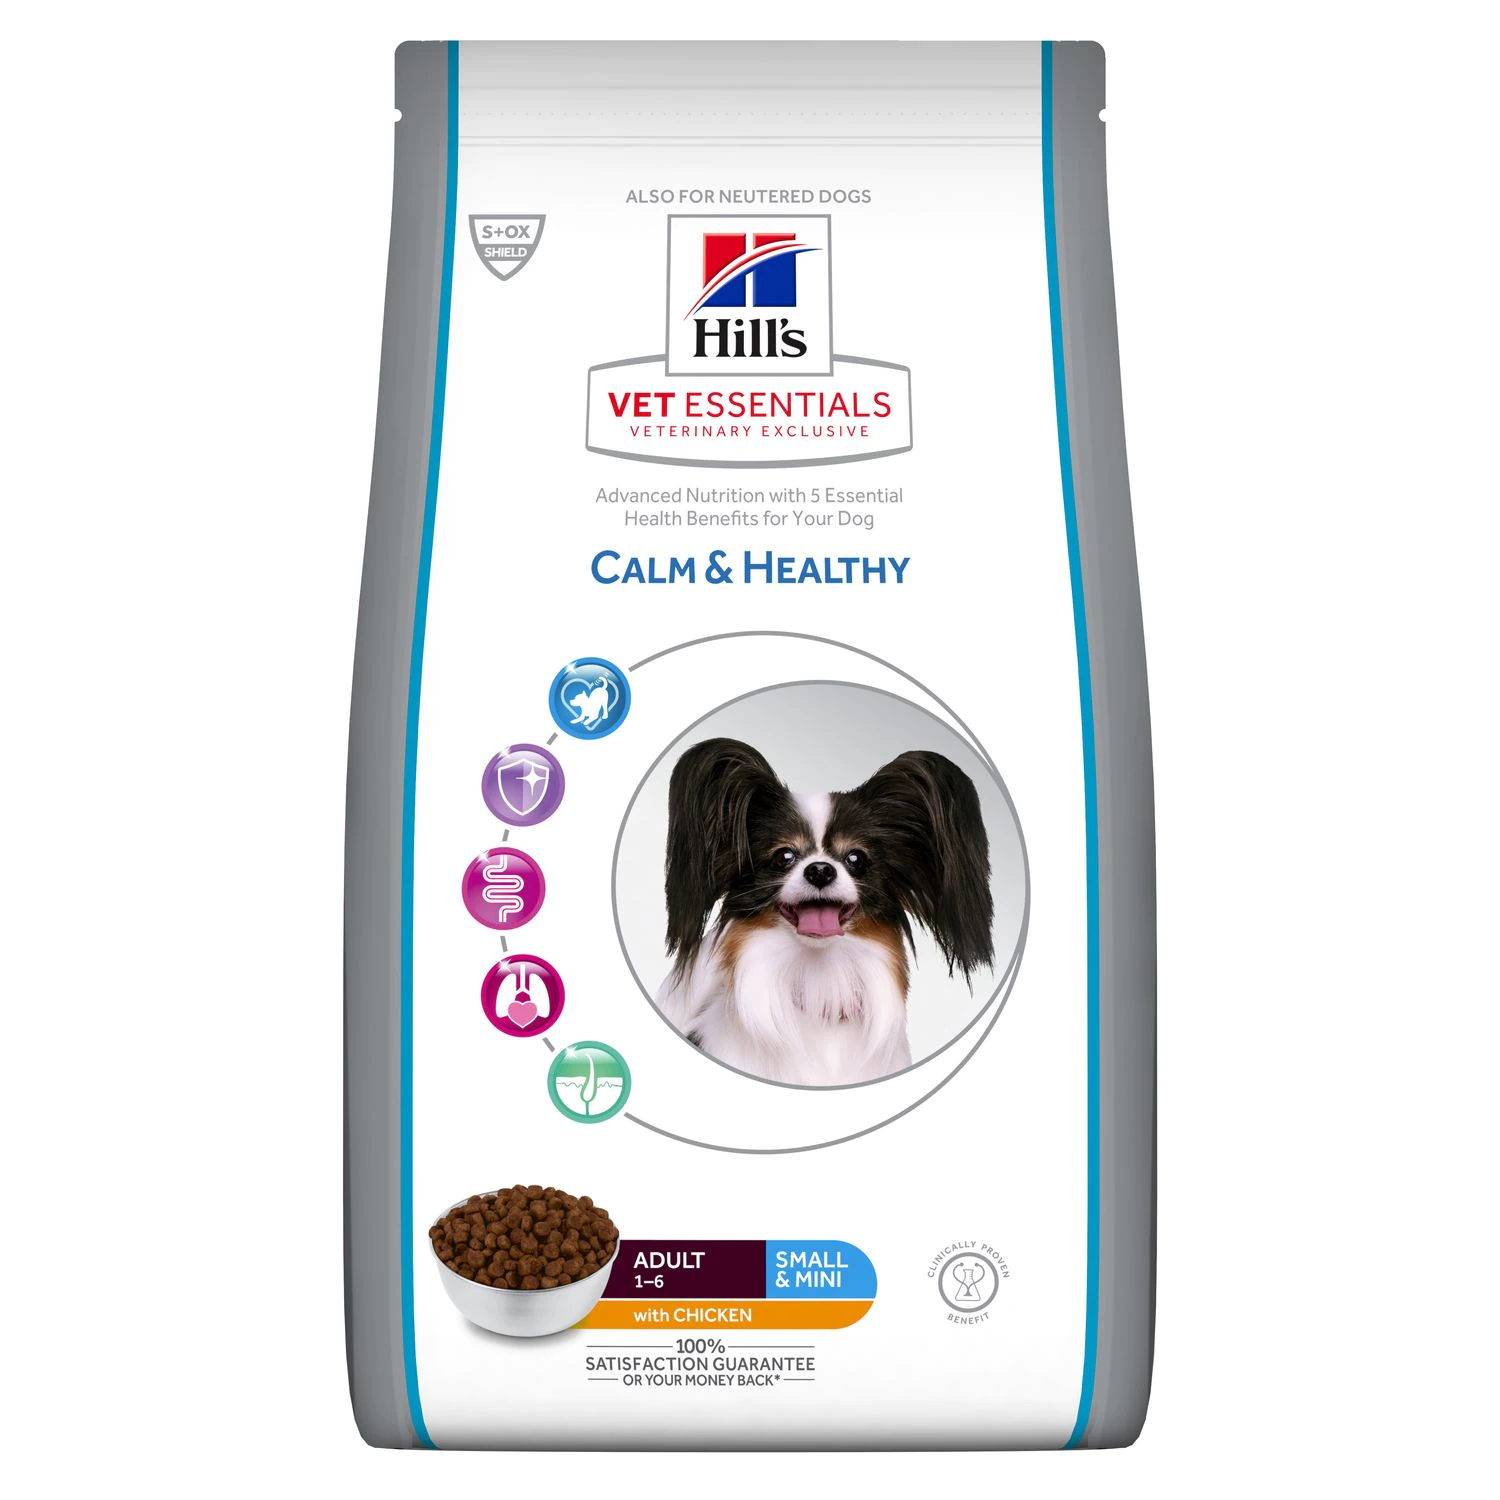 OUTLET - Hill's Vet Essentials Calm & Healthy Adult Small & Mini Hond - 2kg